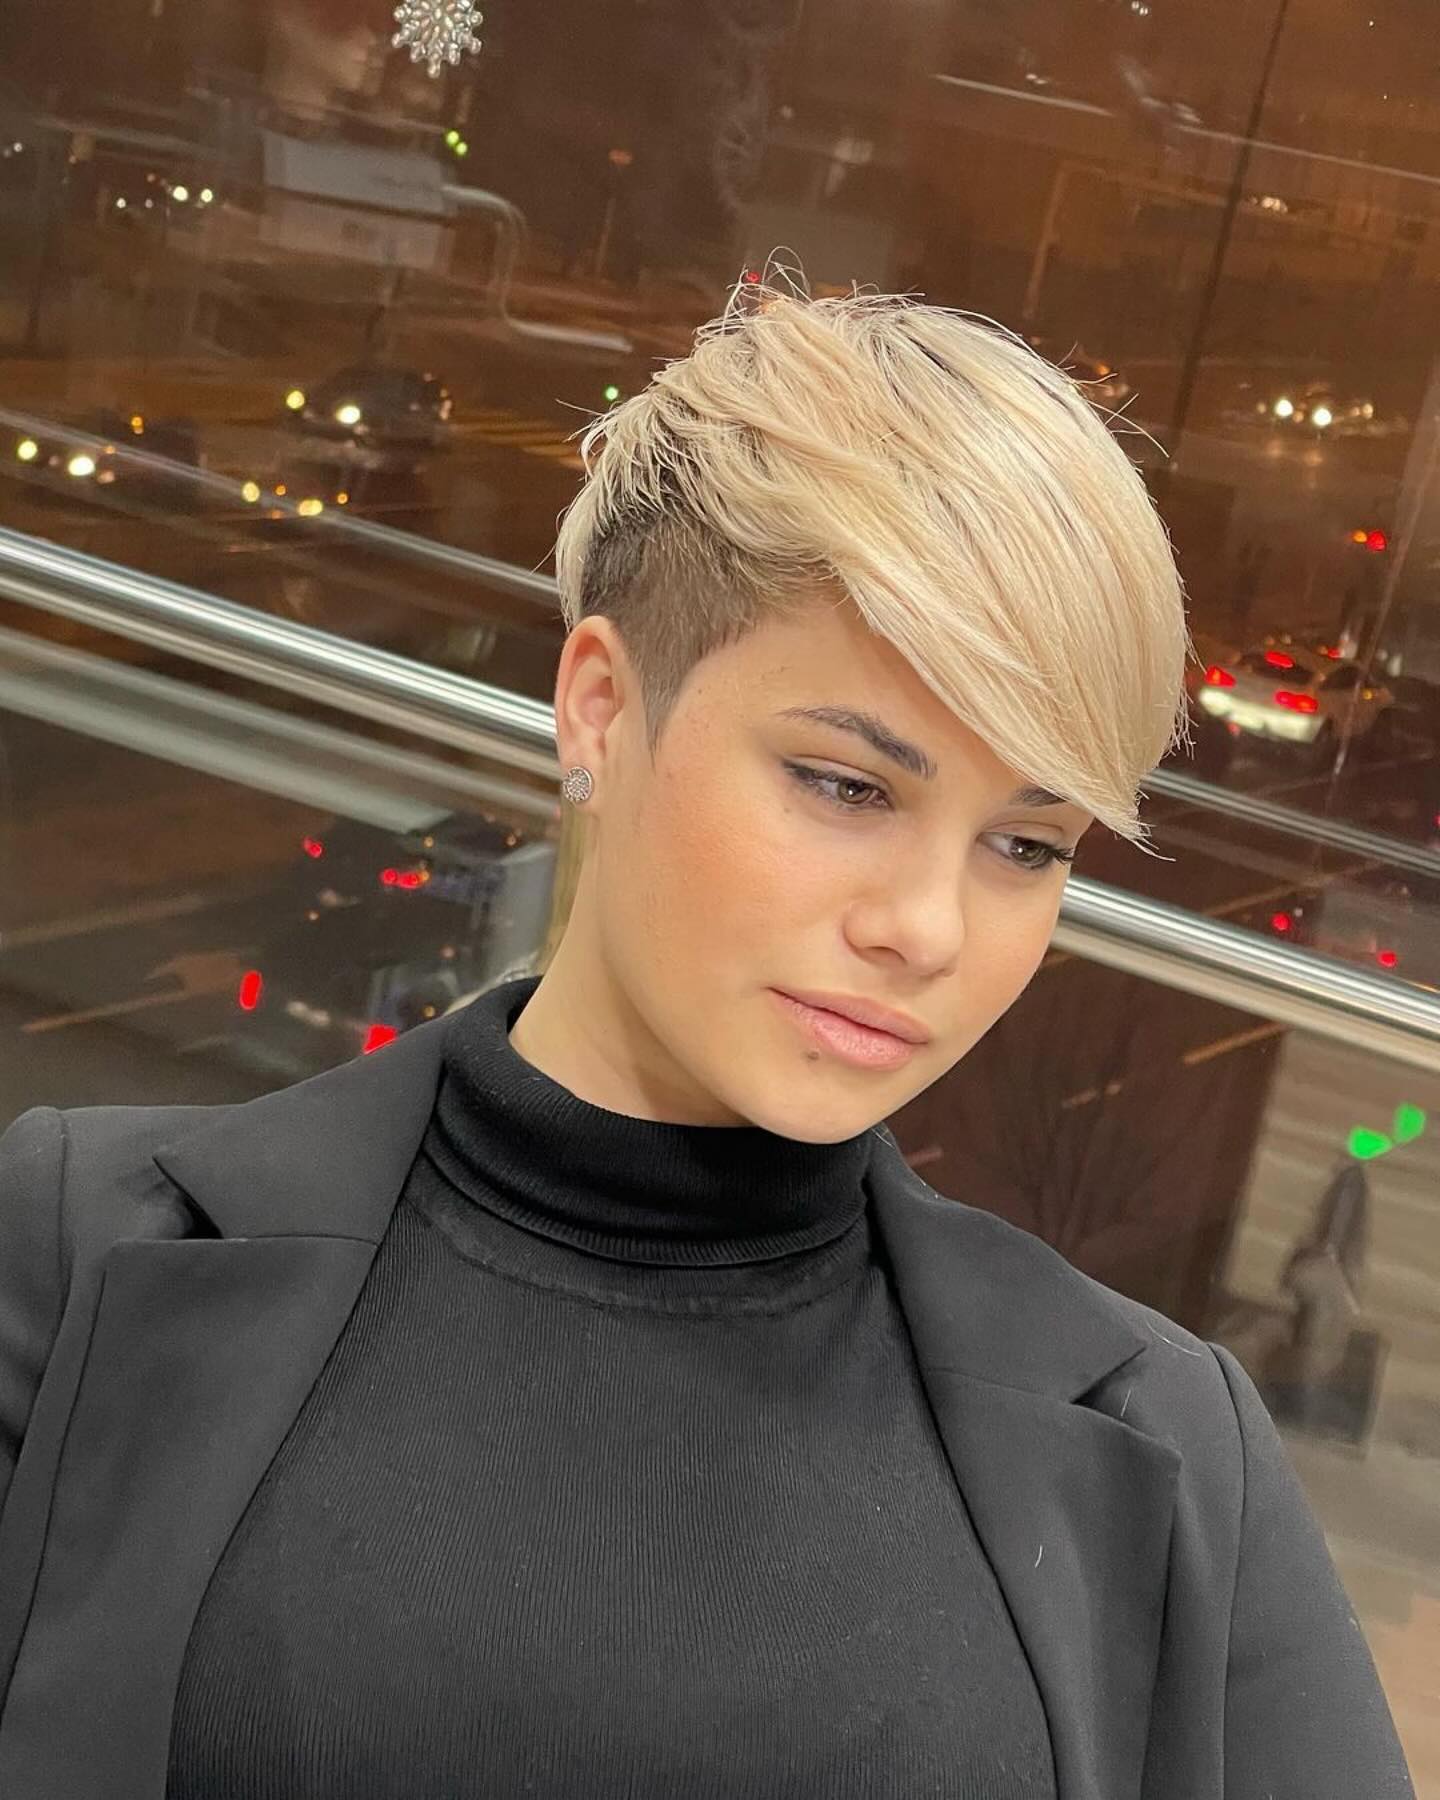 25. Blonde Ambition Long Pixie Cut - Long Pixie Cut for Trendy Hairstyle